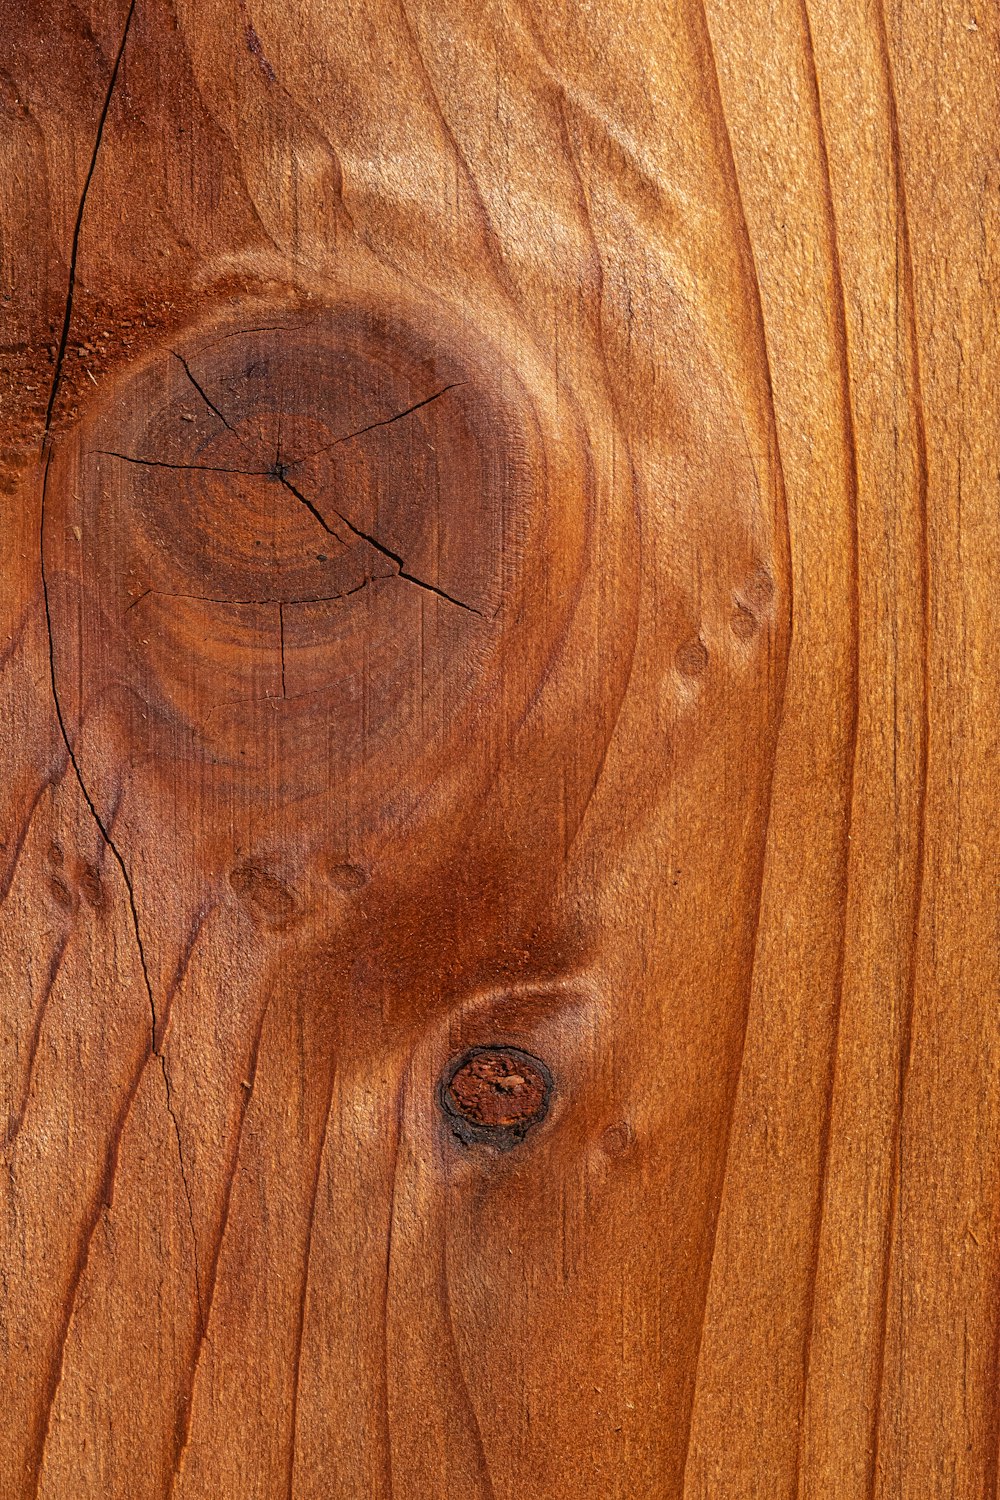 a close up of a wood grain surface